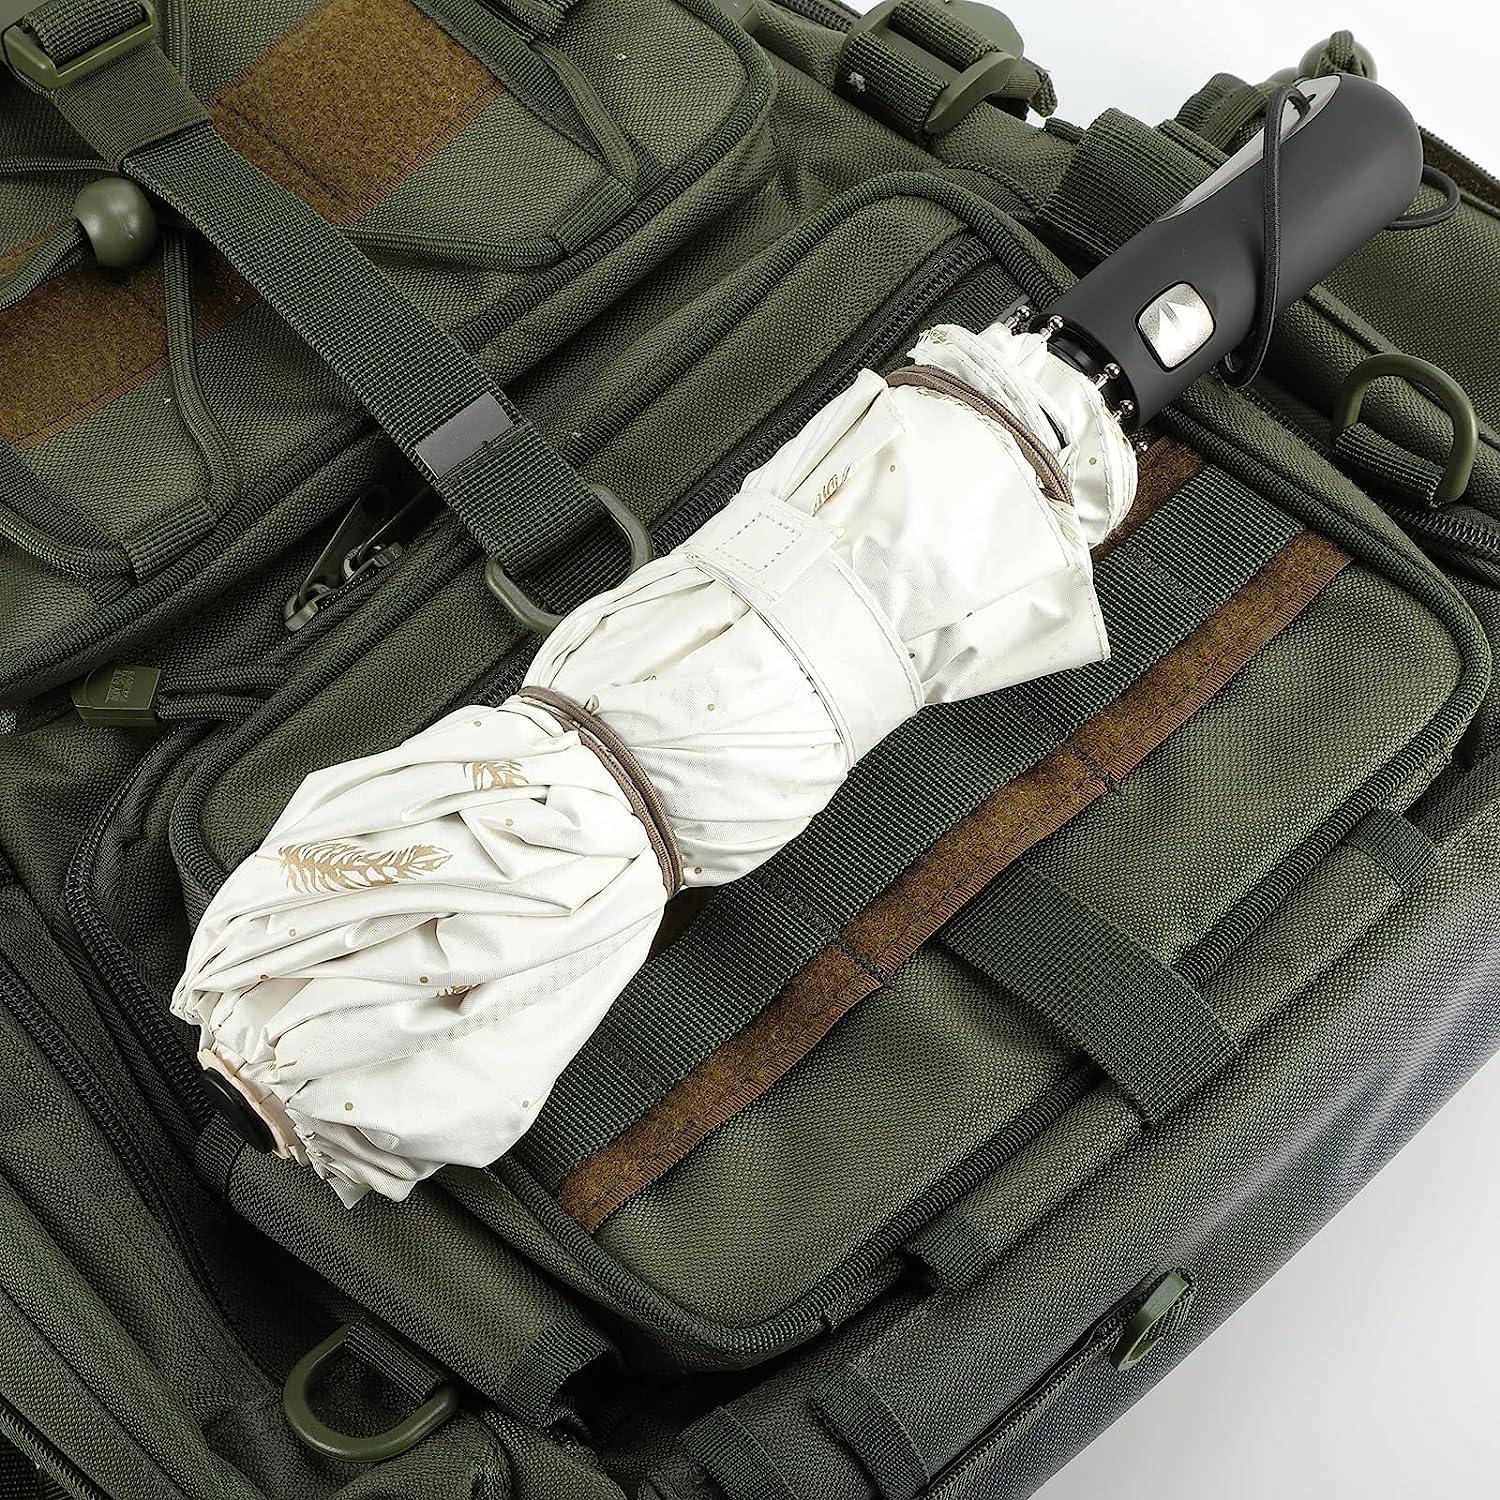 FRTKK Molle Accessories Kit of 34 Attachments for Tactical